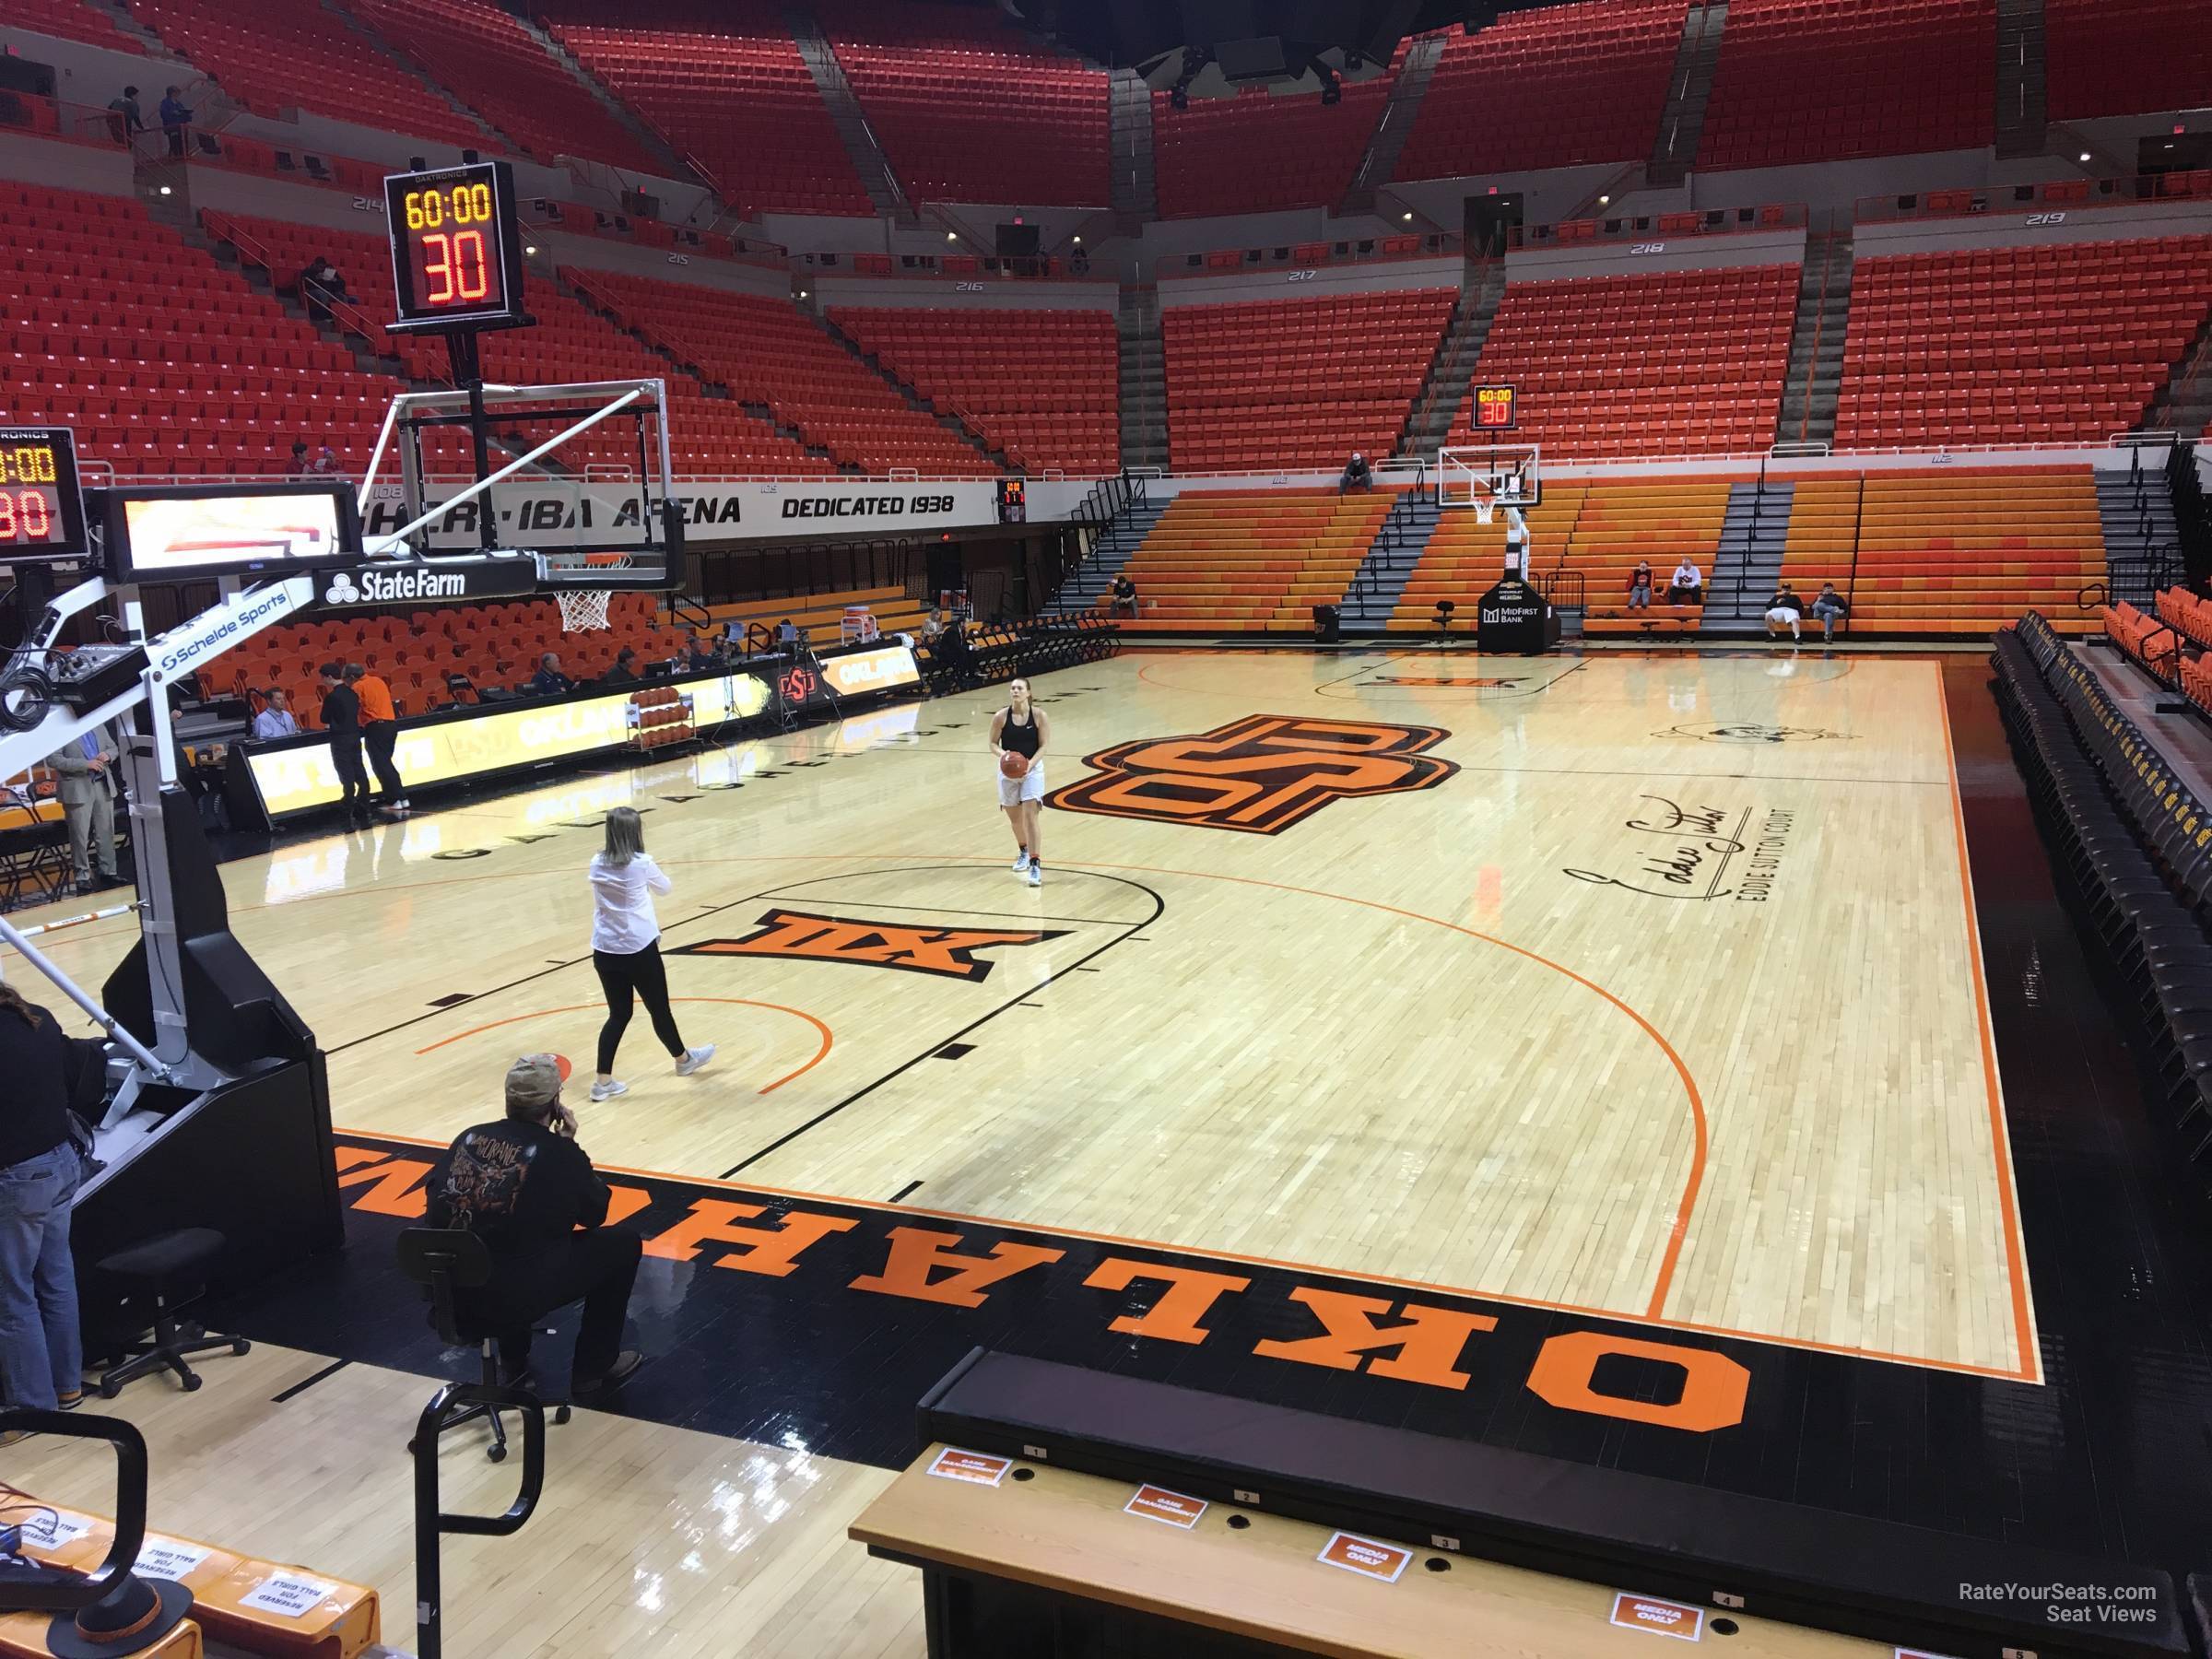 section 104, row 6 seat view  - gallagher-iba arena